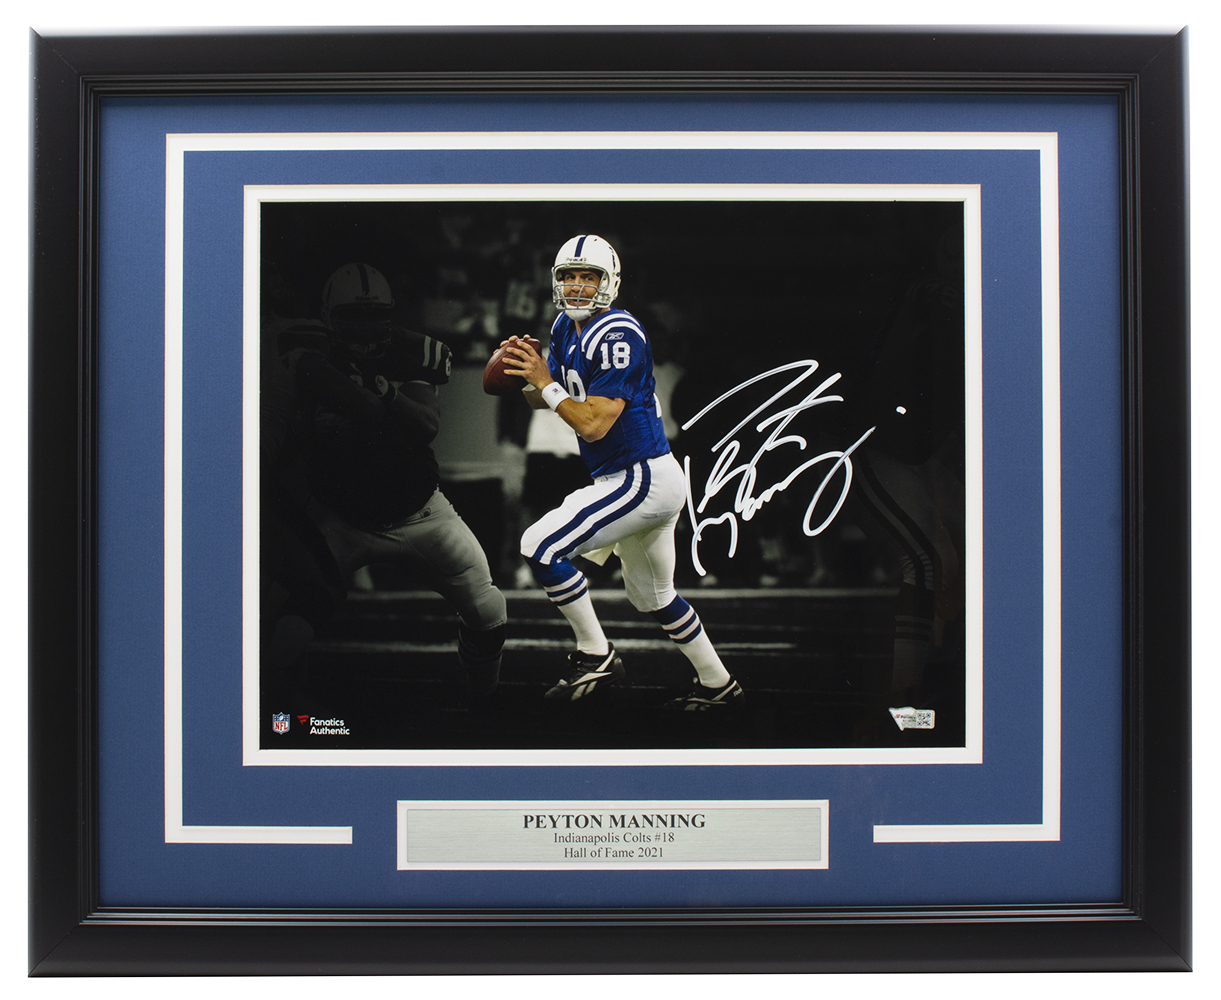 Primary image for Peyton Manning Signed Framed Indianapolis Colts 11x14 Spotlight Photo Fanatics